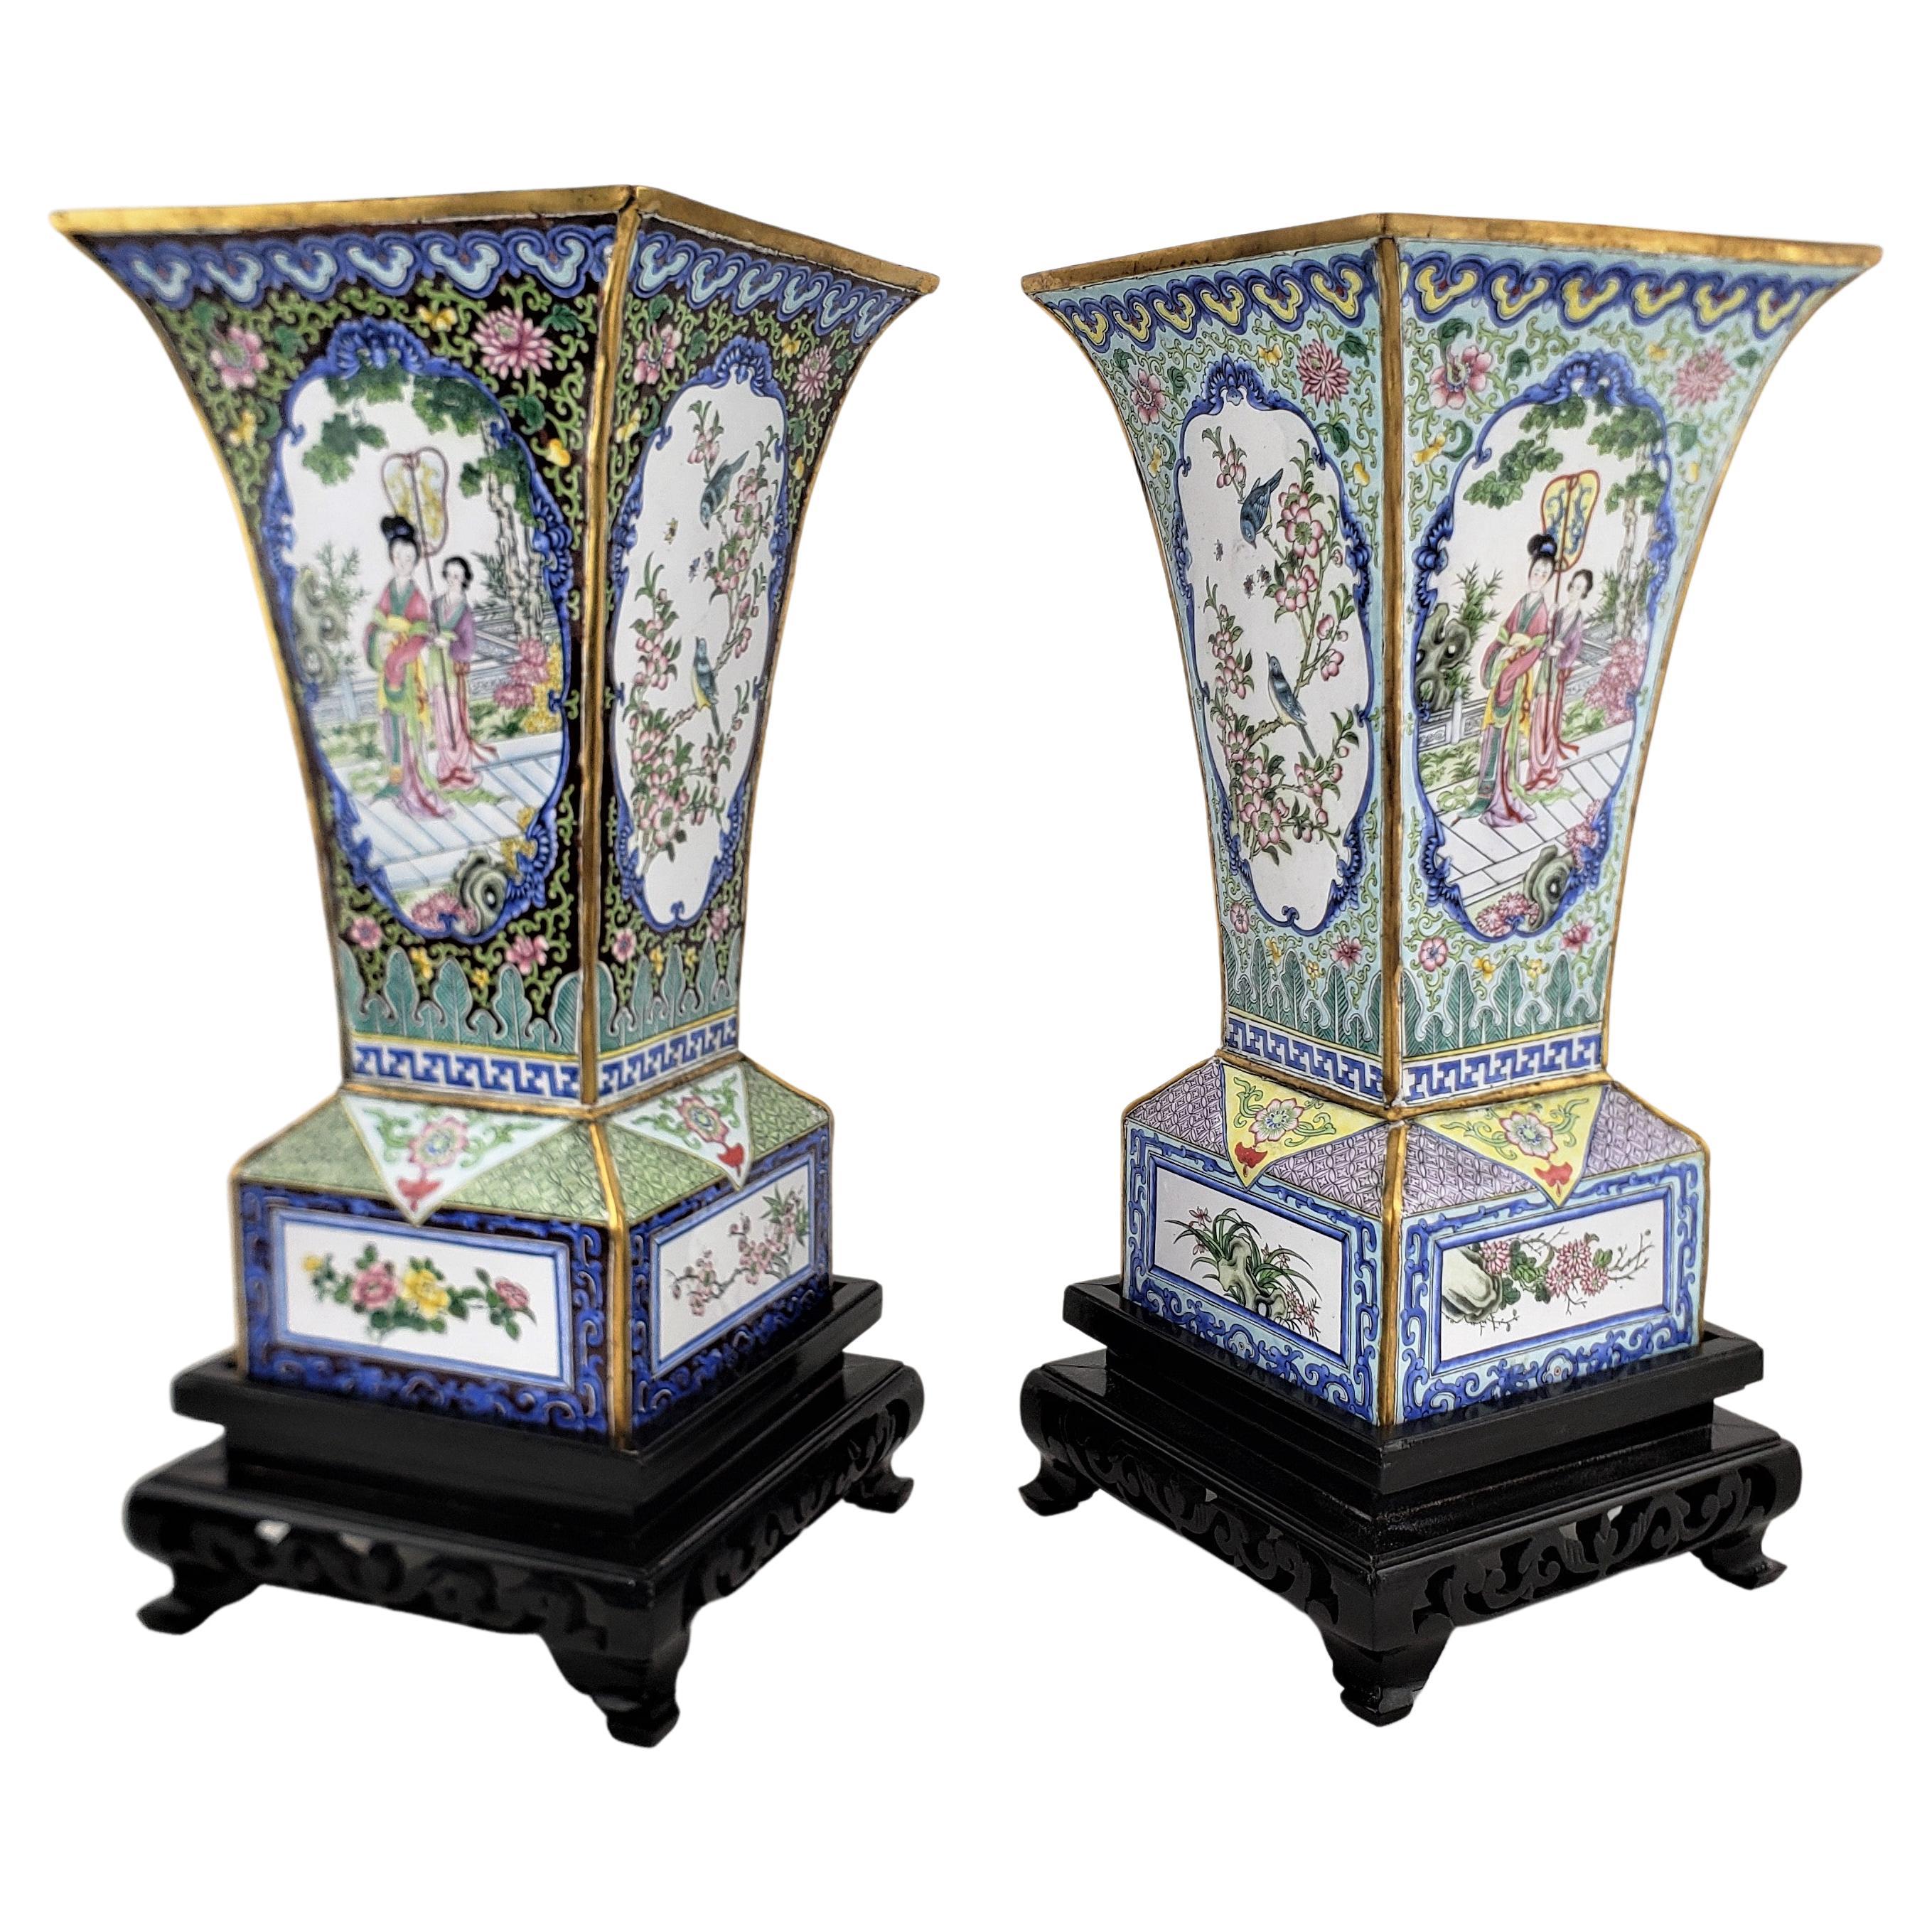 Pair of Mid 20th Century Enameled Copper Vases with Floral & Geisha Decoration For Sale